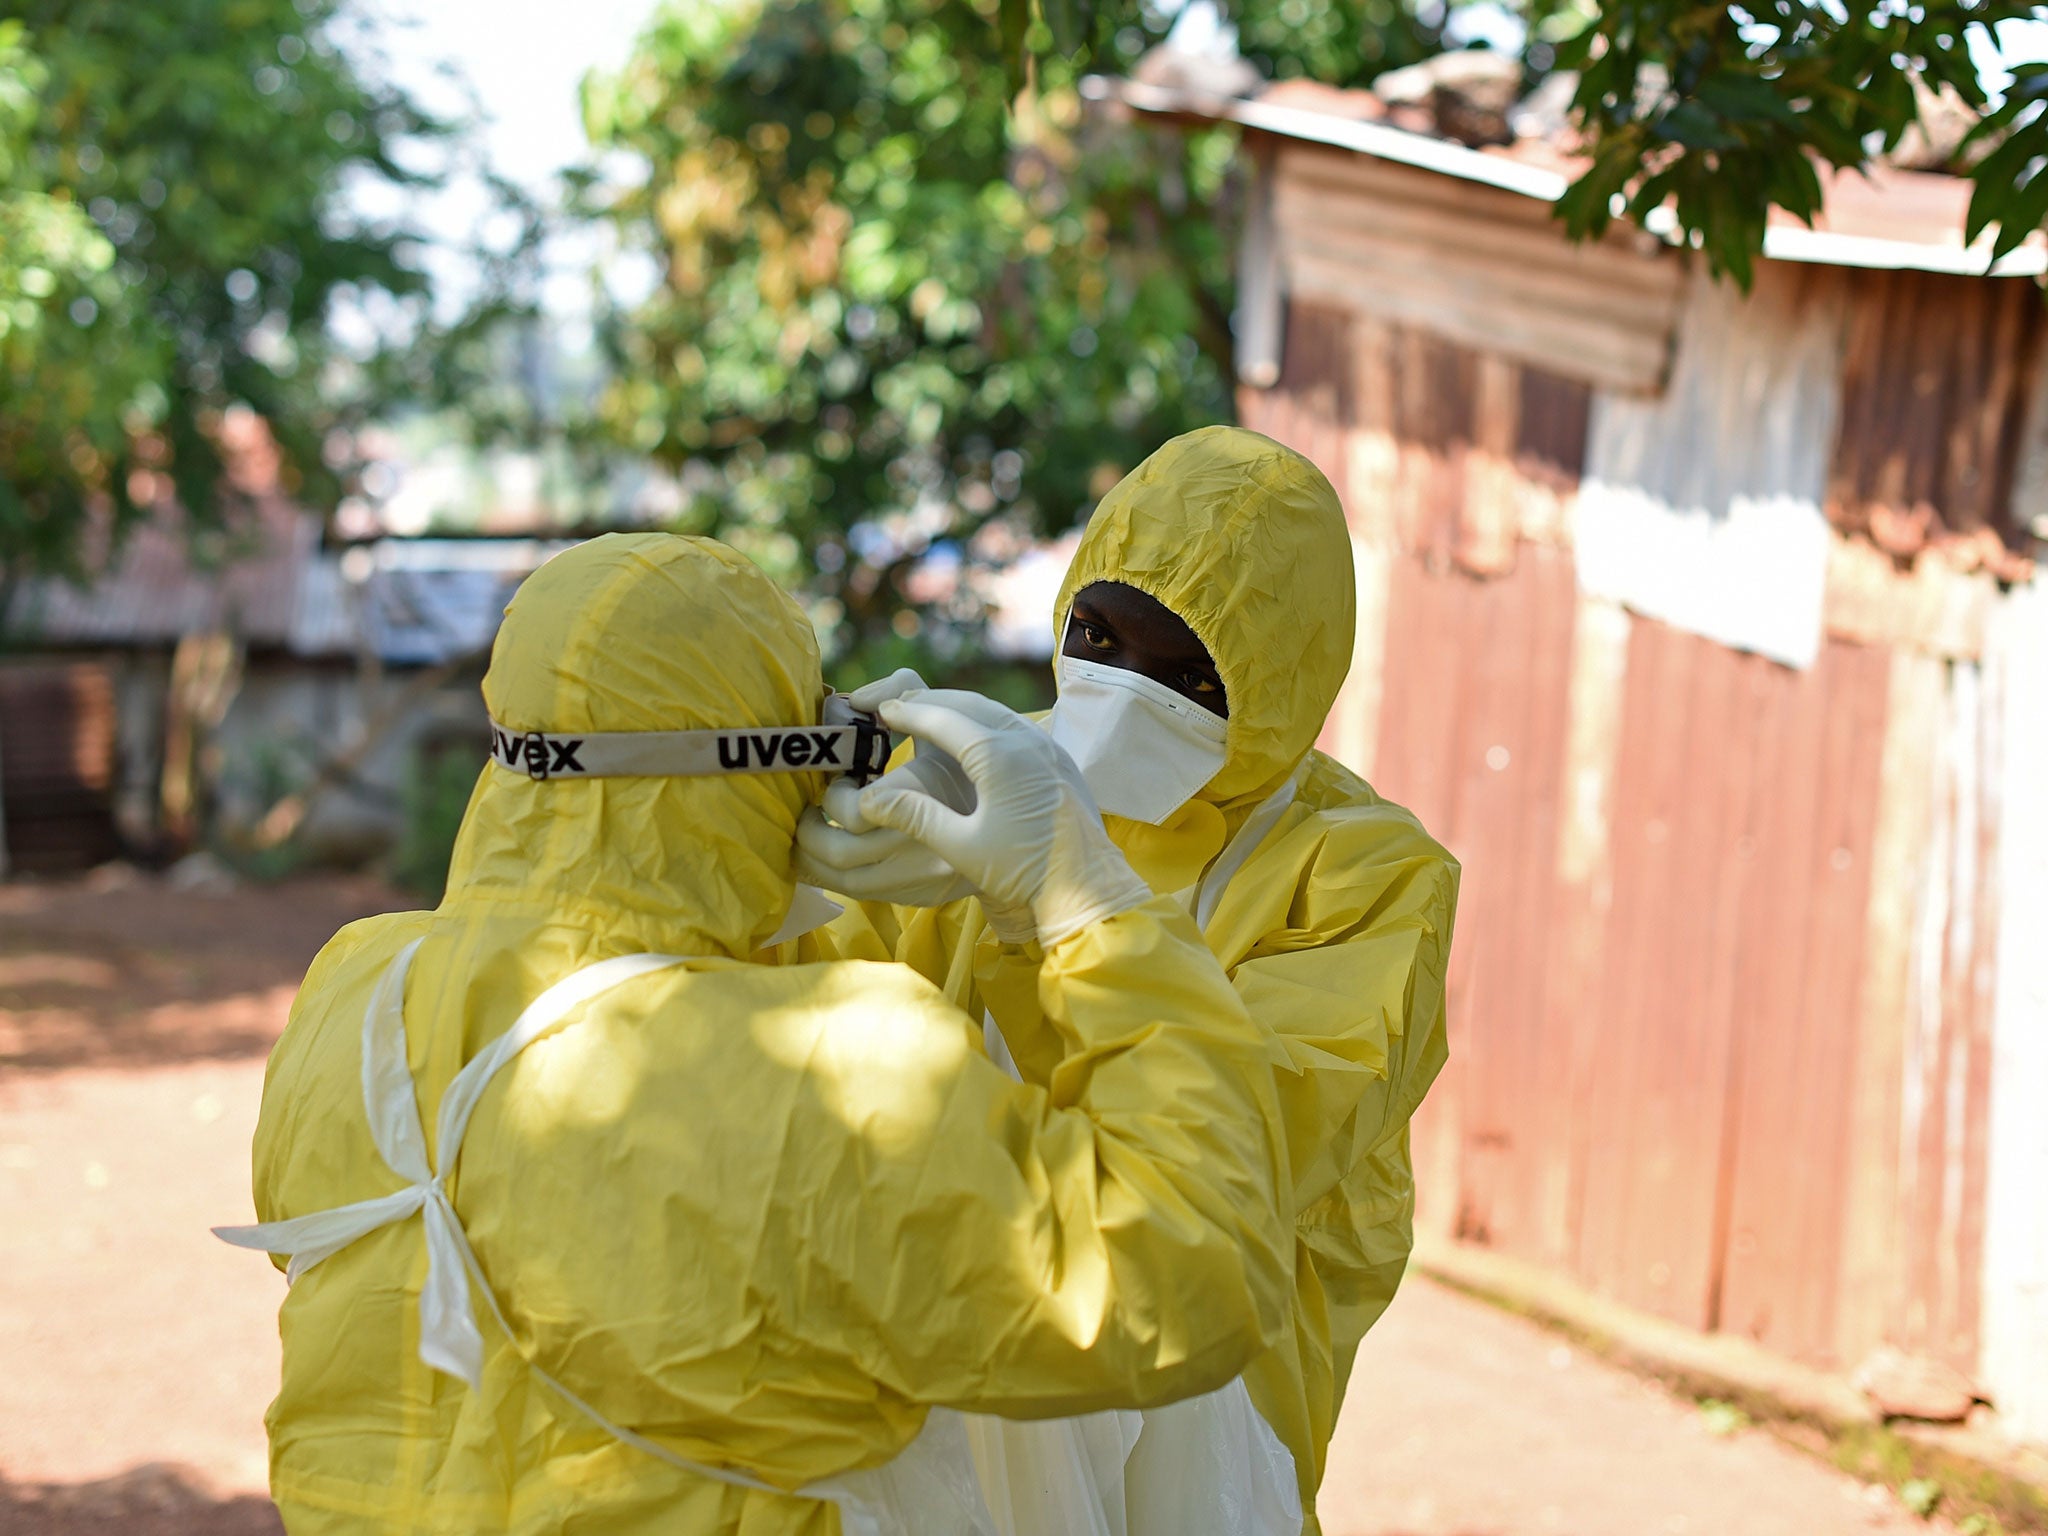 Health workers from Sierra Leone's Red Cross Society Burial Team 7 prepare to remove a body from a house in Freetown on November 12